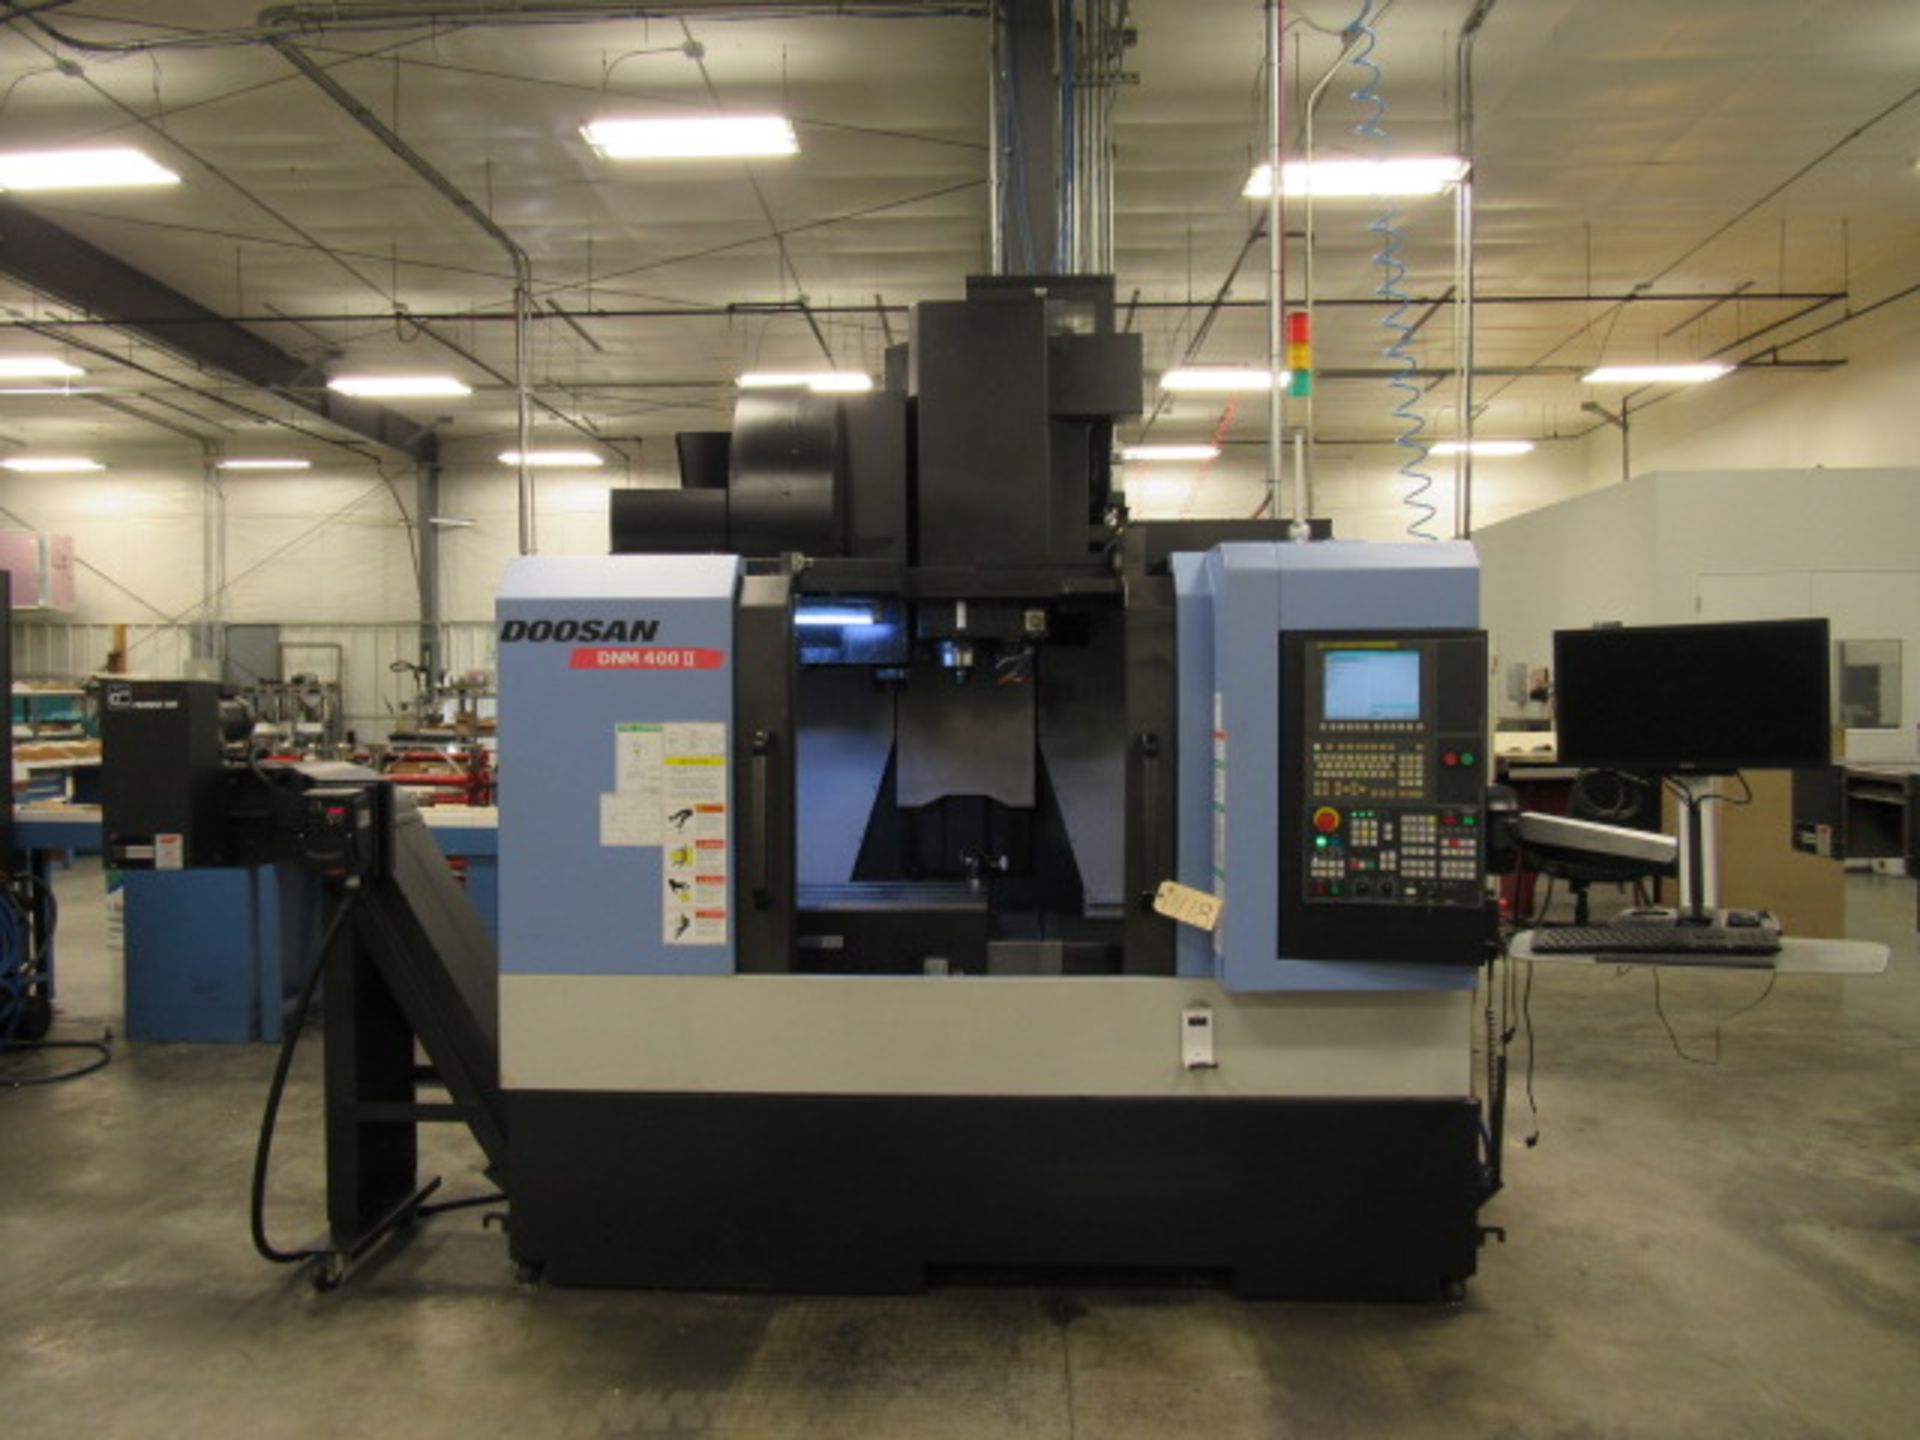 Doosan DNM400II CNC Vertical Machining Center with 36.2'' x 17.1'' Table, Big Plus #40, Spindle - Image 9 of 9